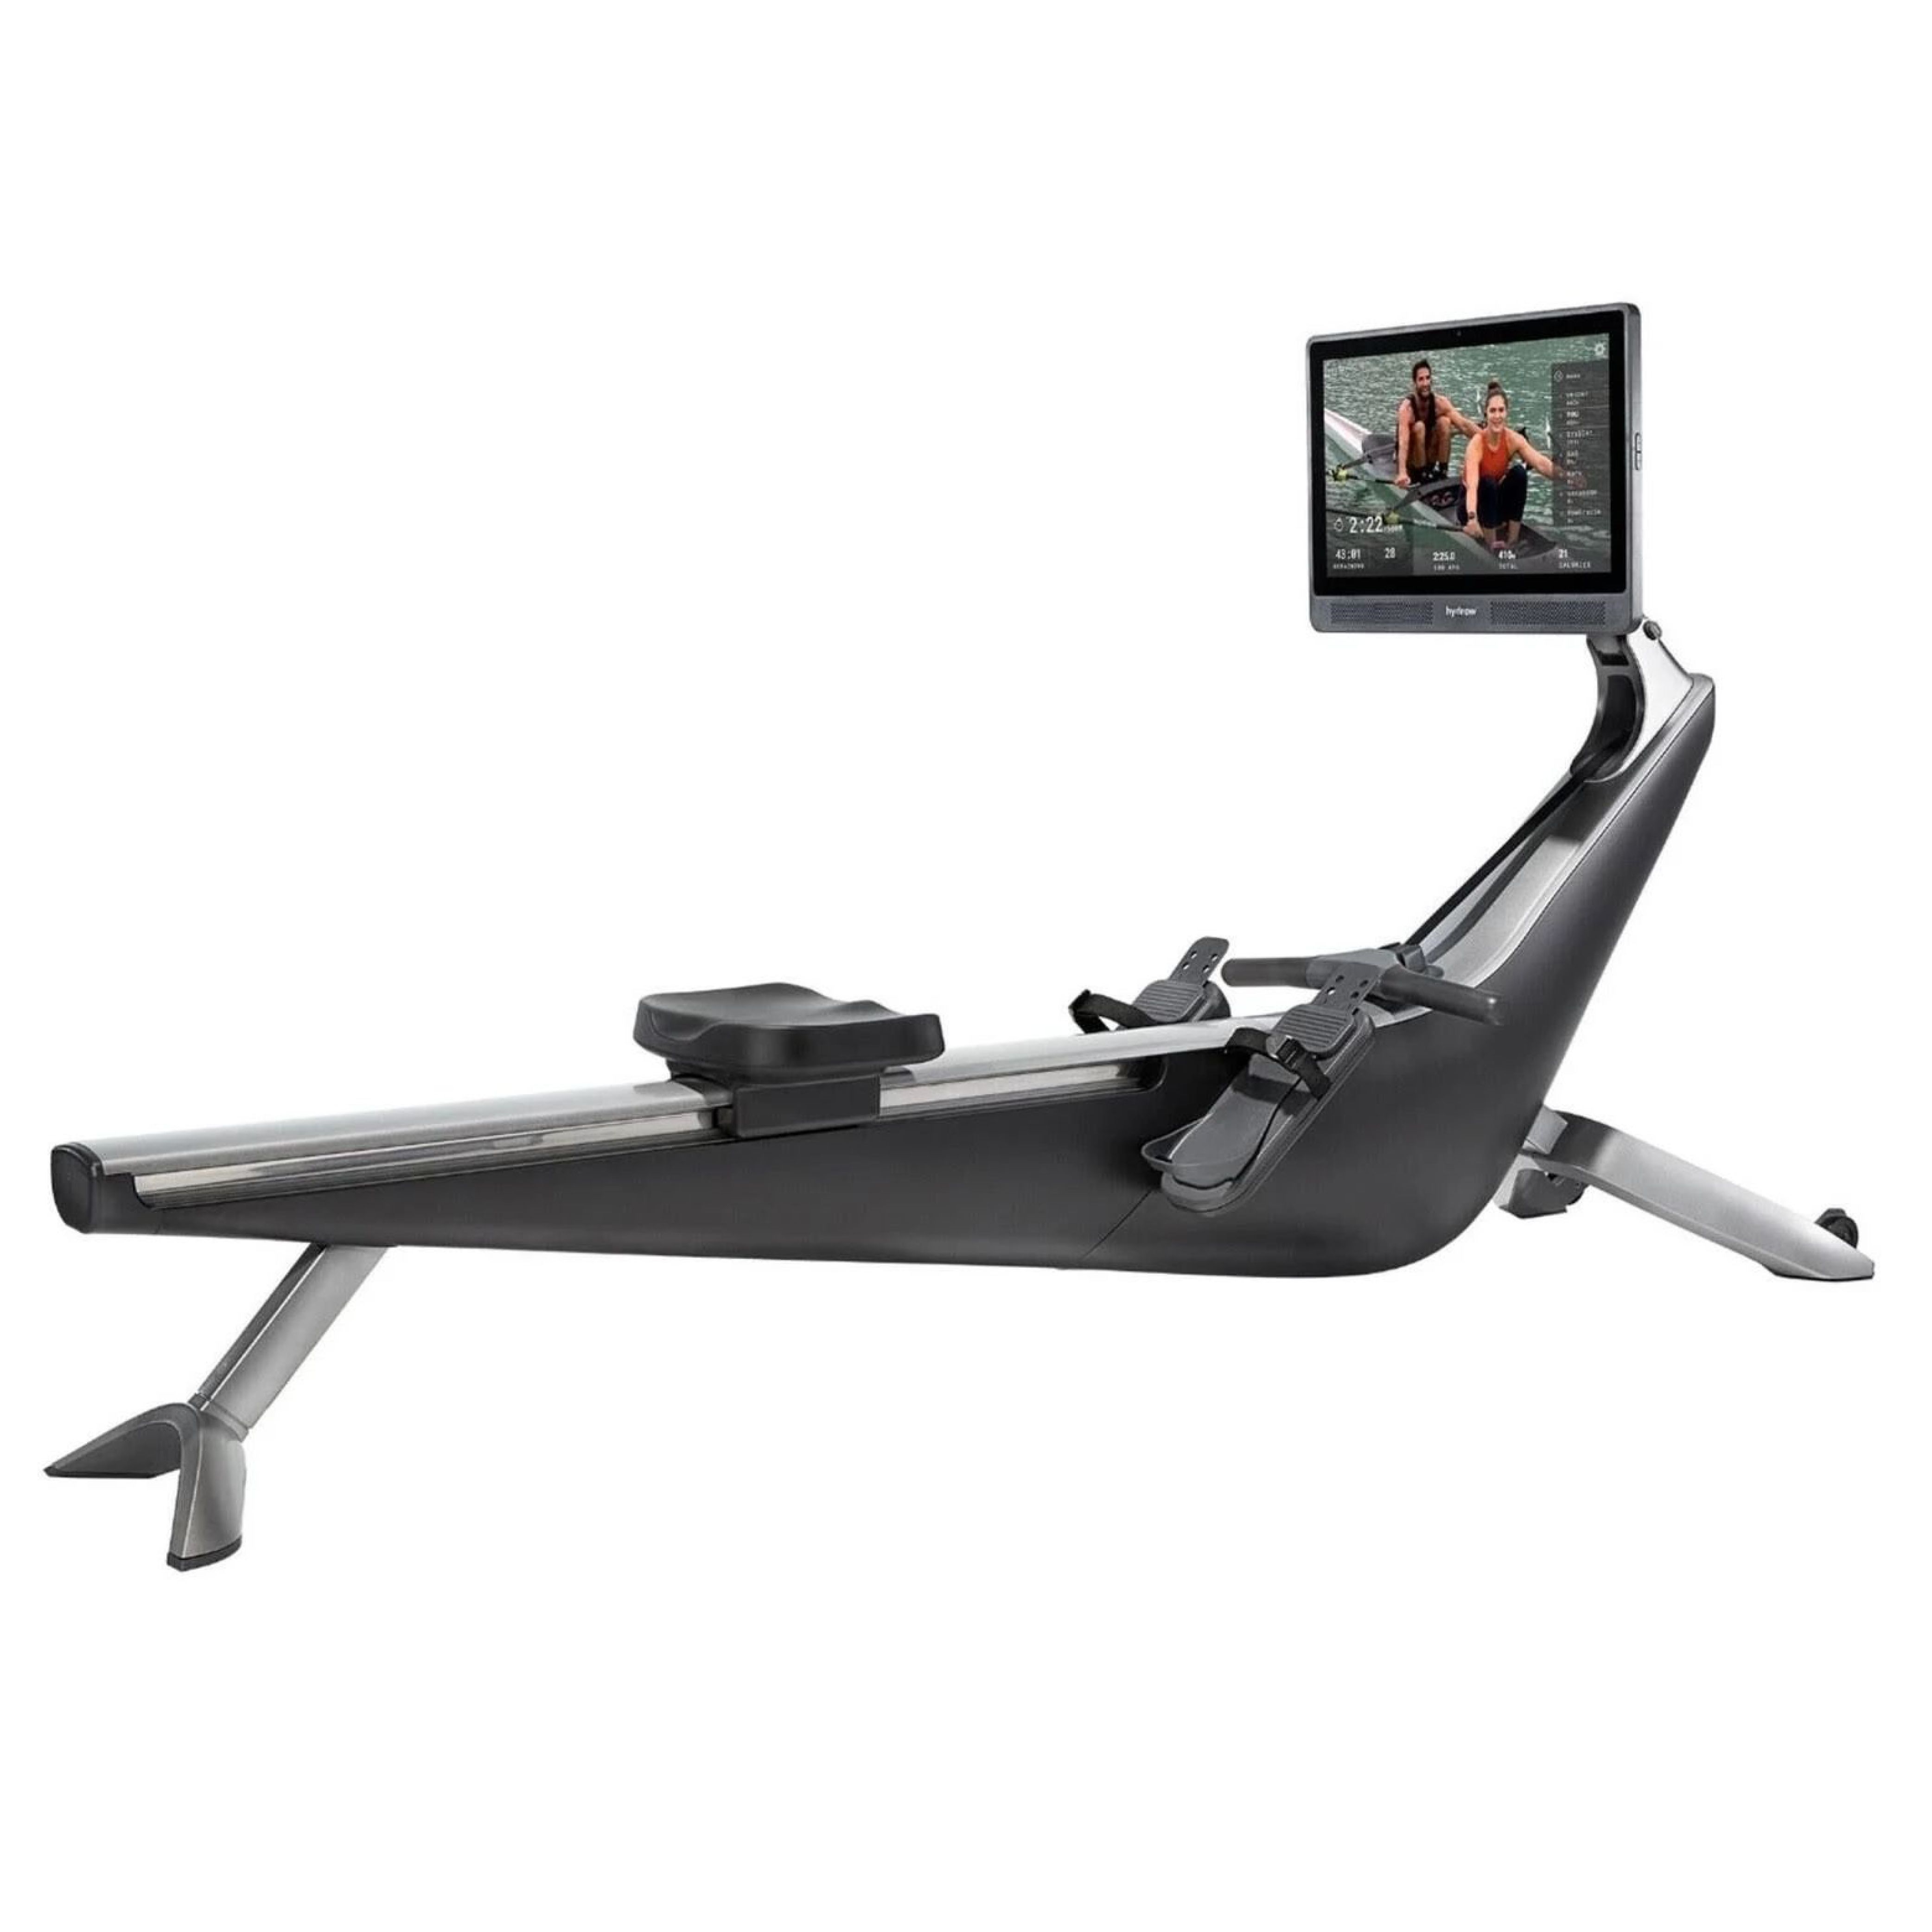 Amazing Details On Fitness Reality Rowing Machine